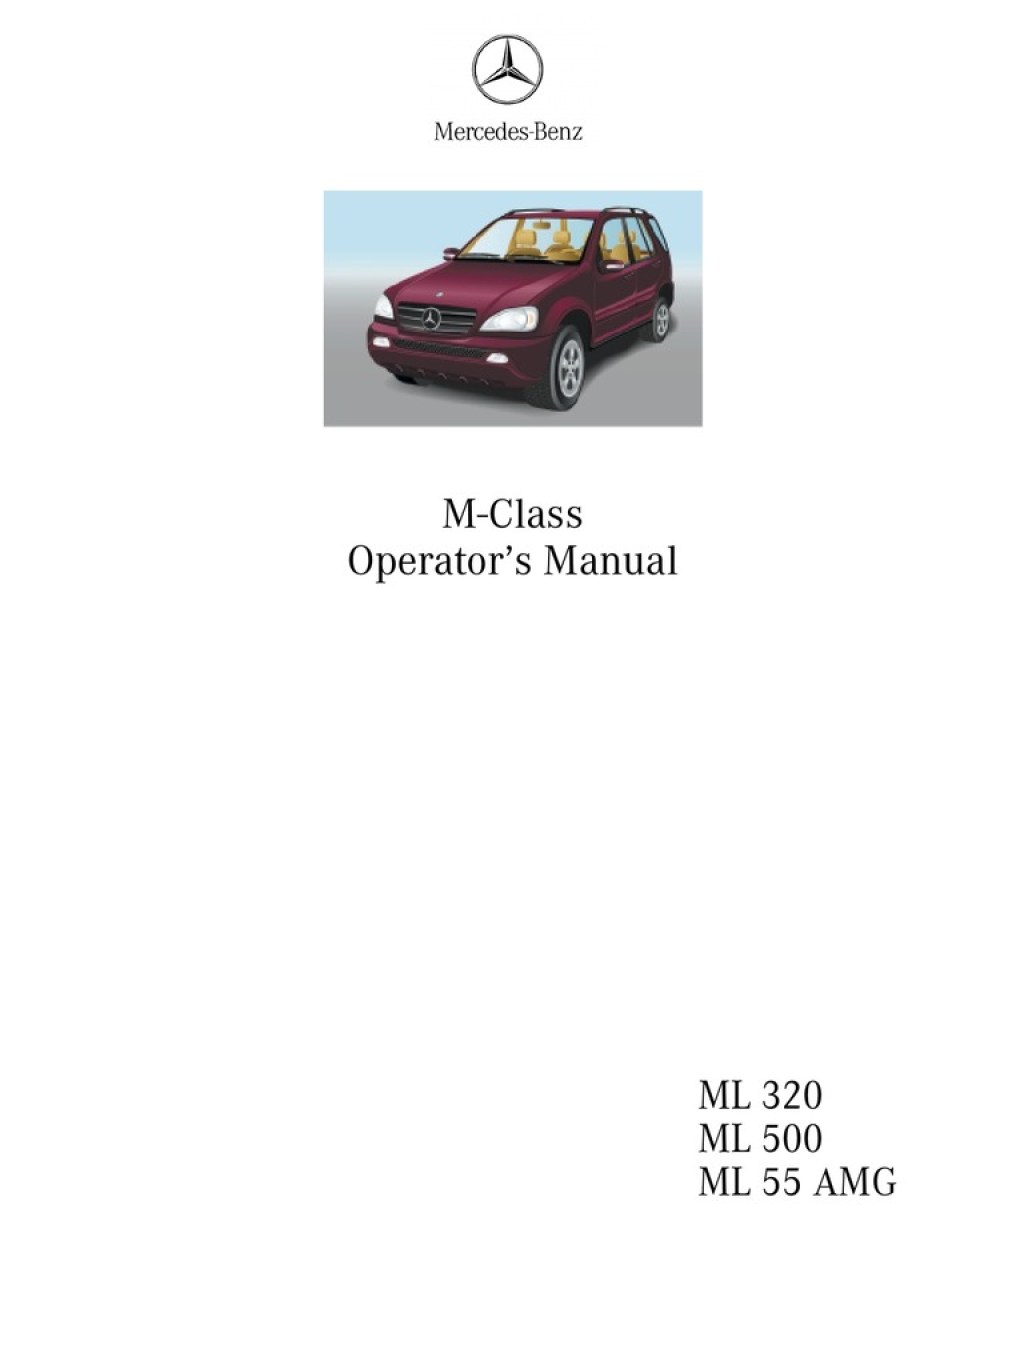 Picture of: Mercedes Ml Ml Mlamg Owners Manual   PDF  Airbag